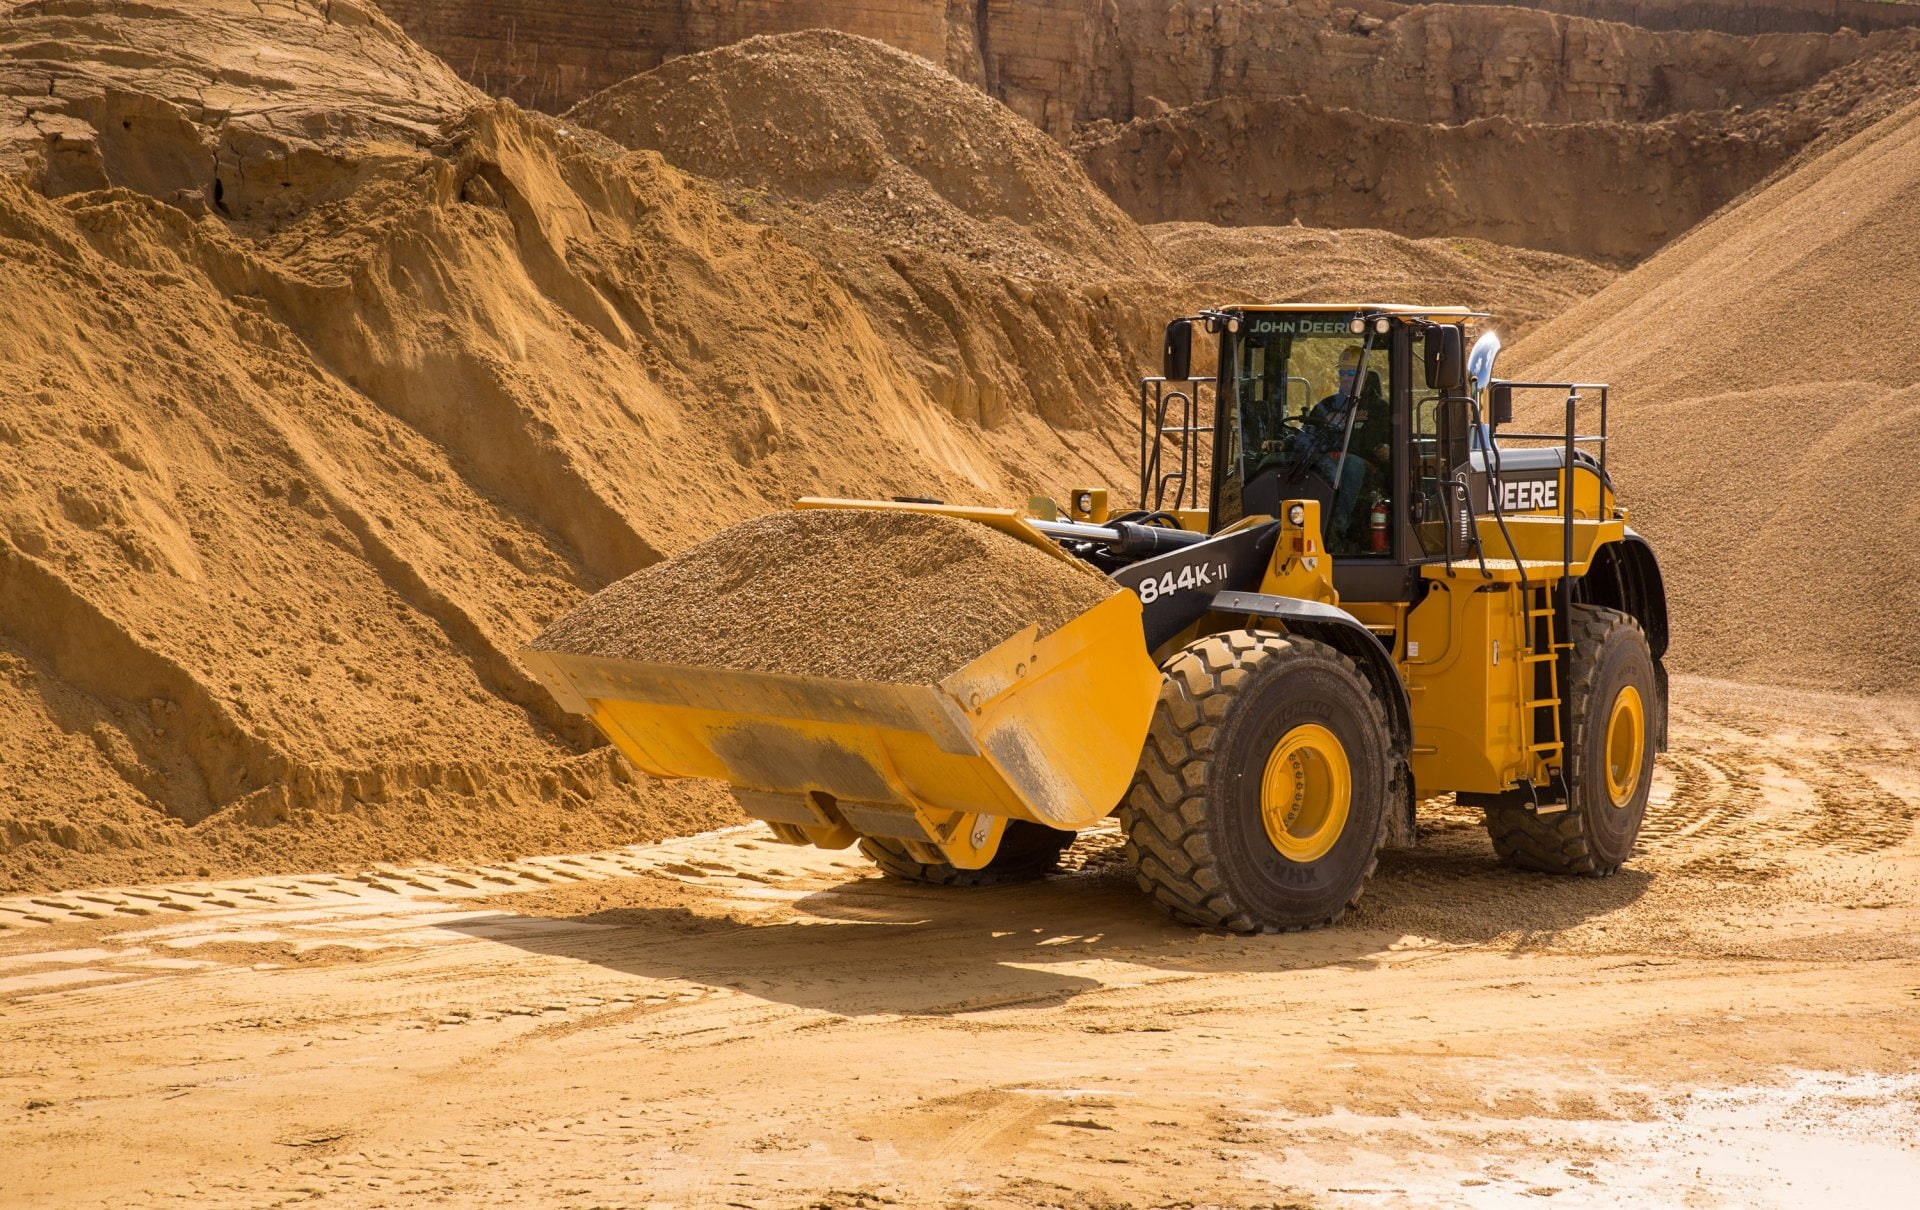 A powerful John Deere Wheel Loader in action at the construction site. Wallpaper